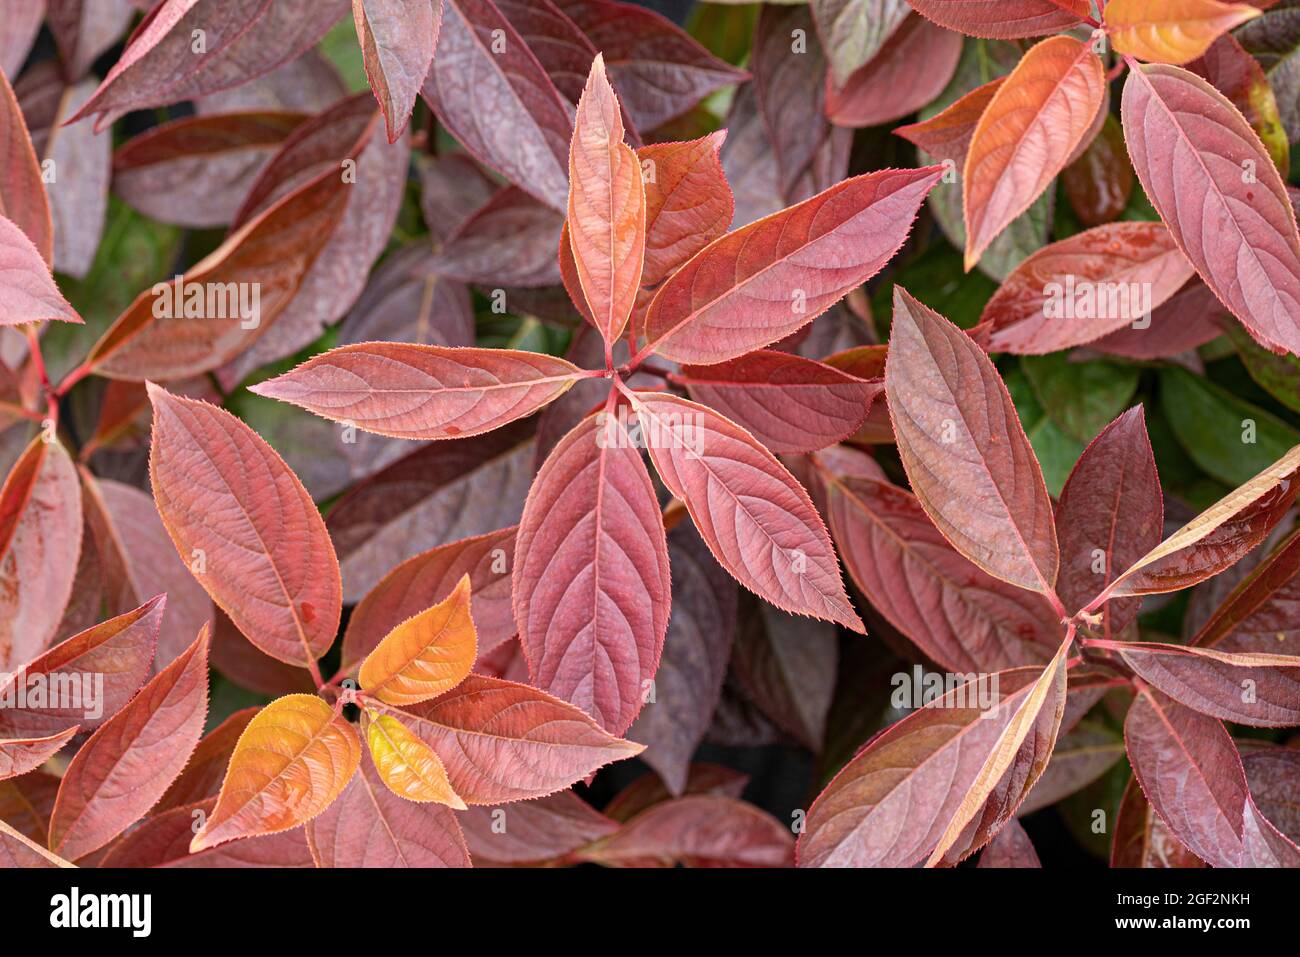 Virginia willow, Virginia sweetspire (Itea virginica 'Little Henry', Itea virginica Little Henry), autumn leaves of cultivar Little Henry, Germany Stock Photo